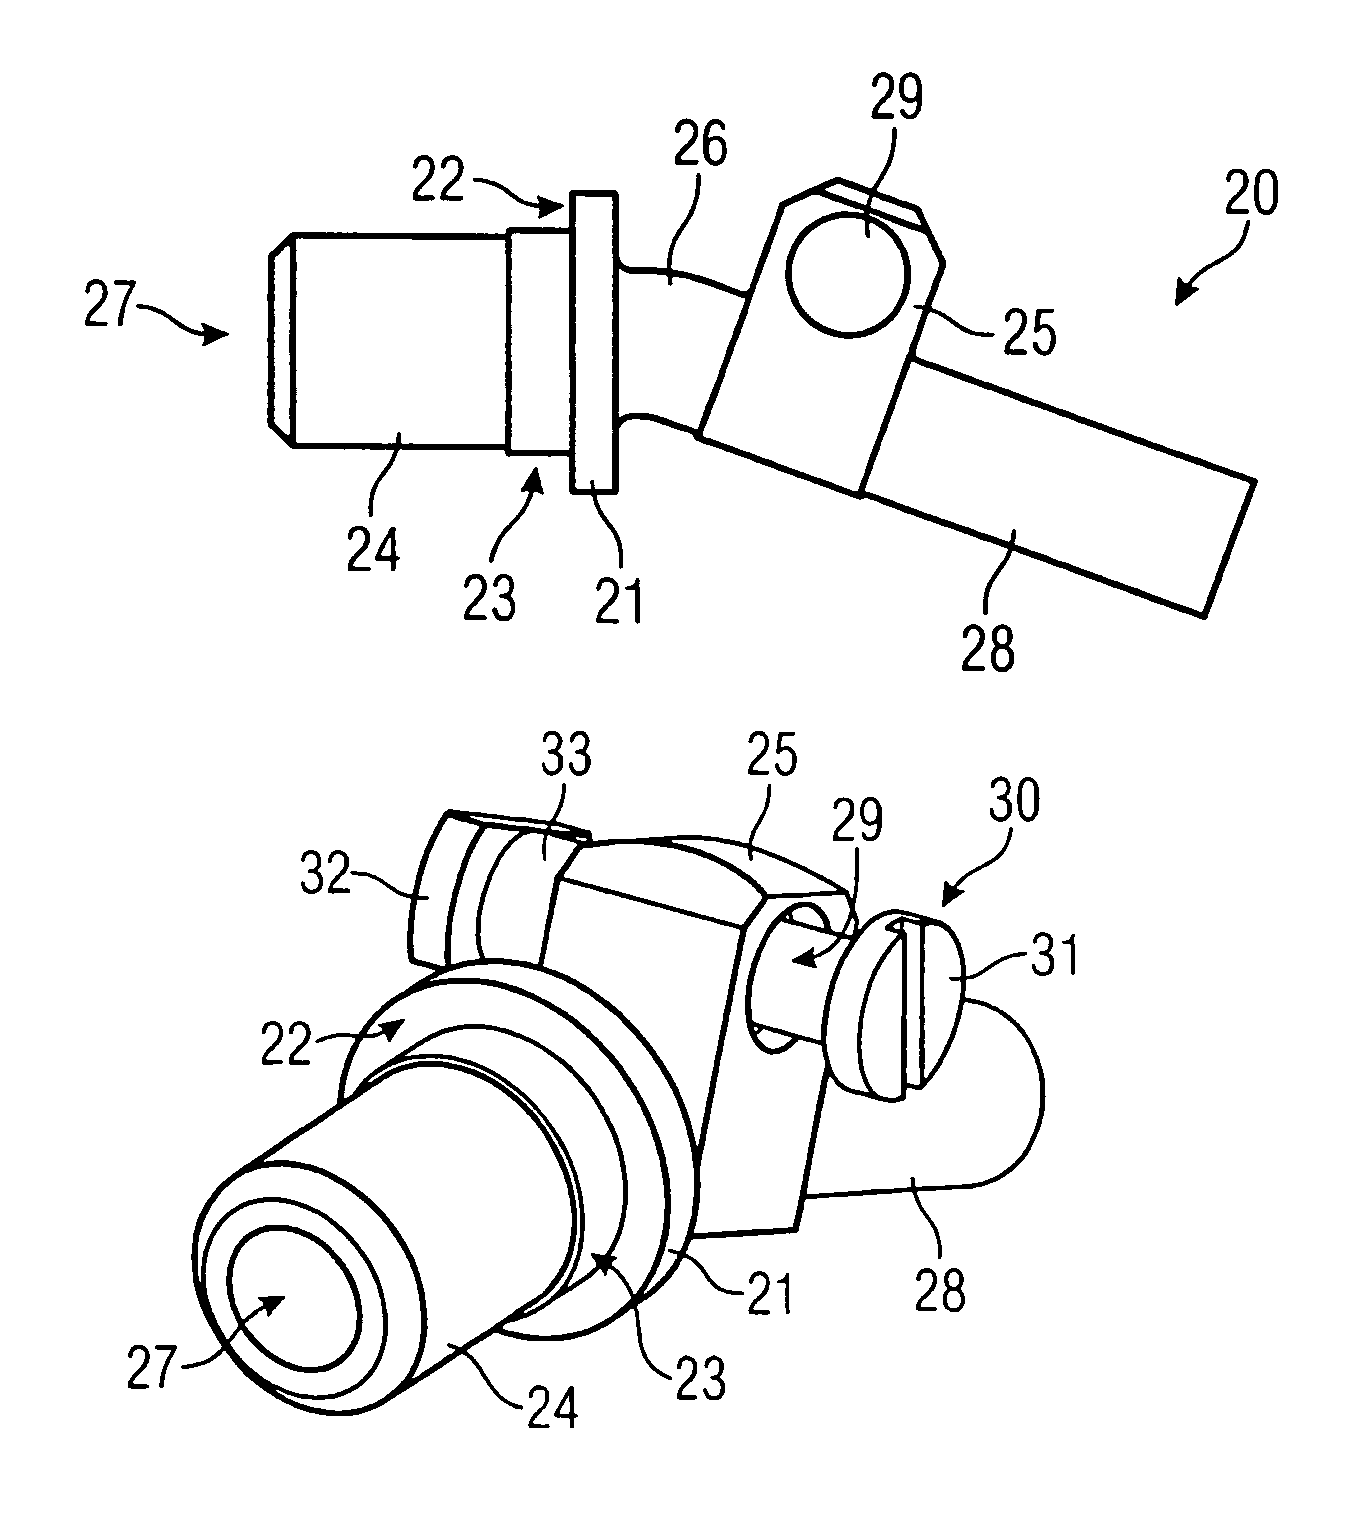 Connection piece for hearing device support hook